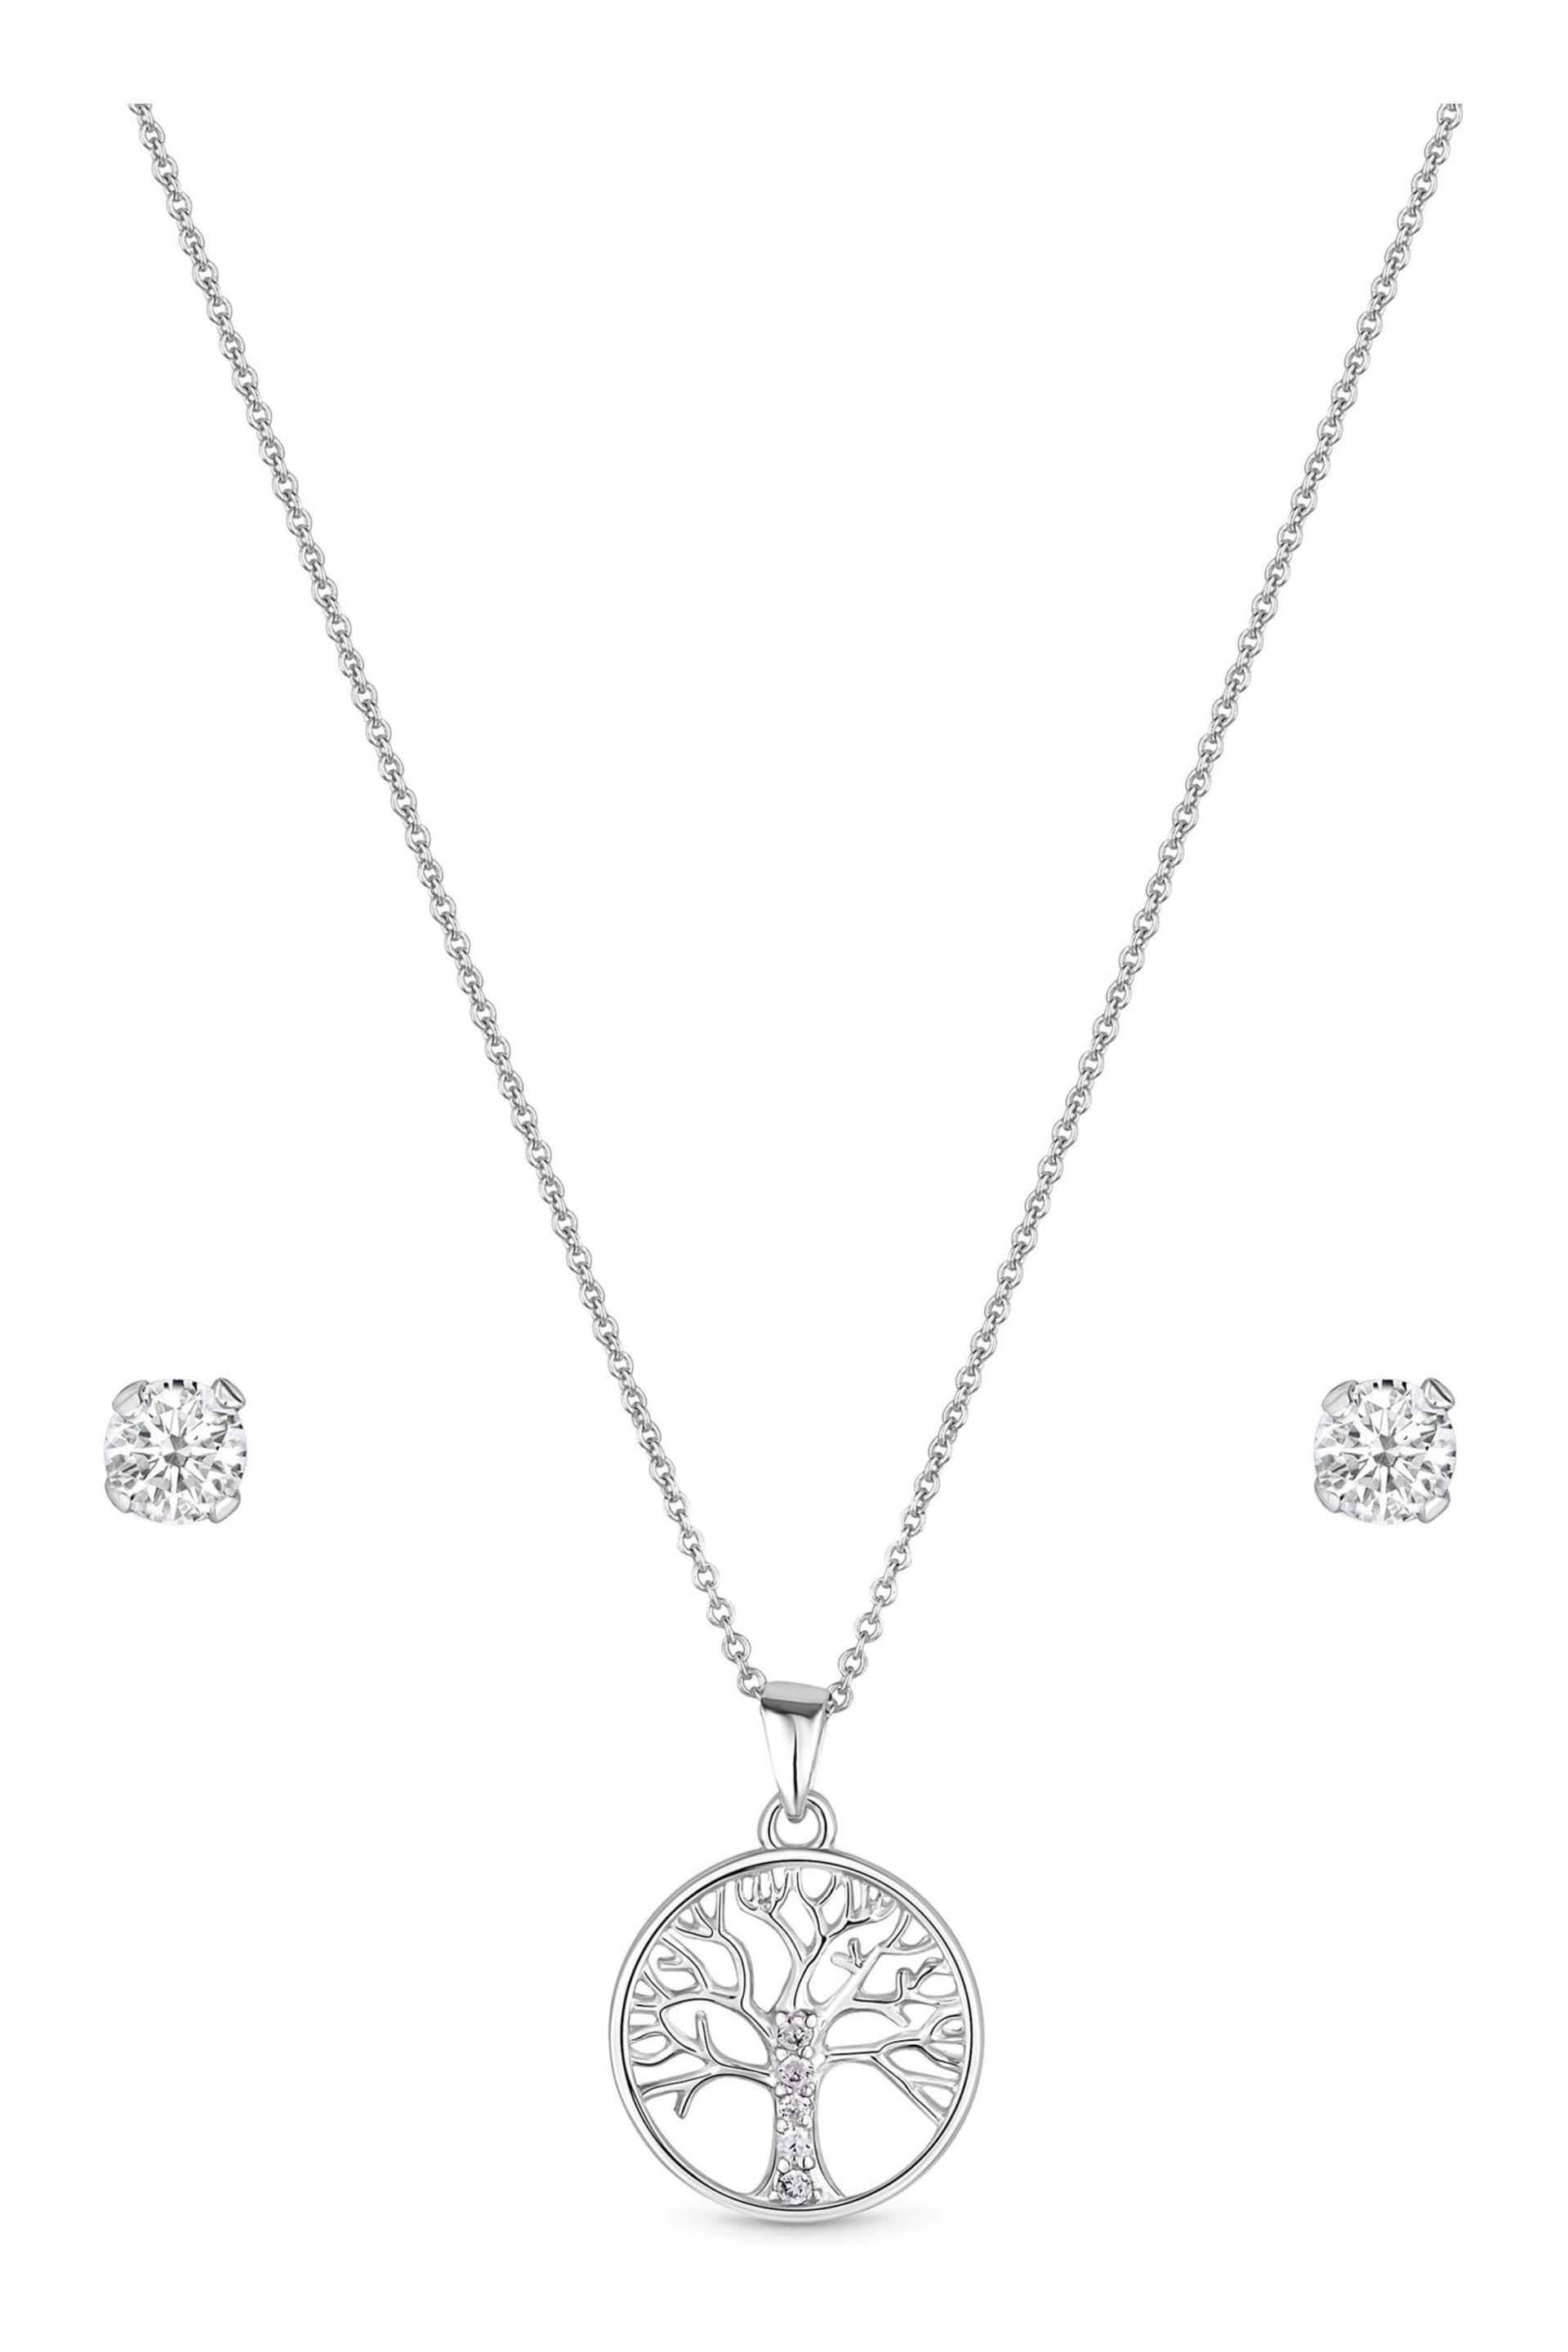 Simply Silver Sterling Silver Tone 925 Cubic Zirconia Tree of Love Jewellery Set - Gift Boxed - Image 1 of 2